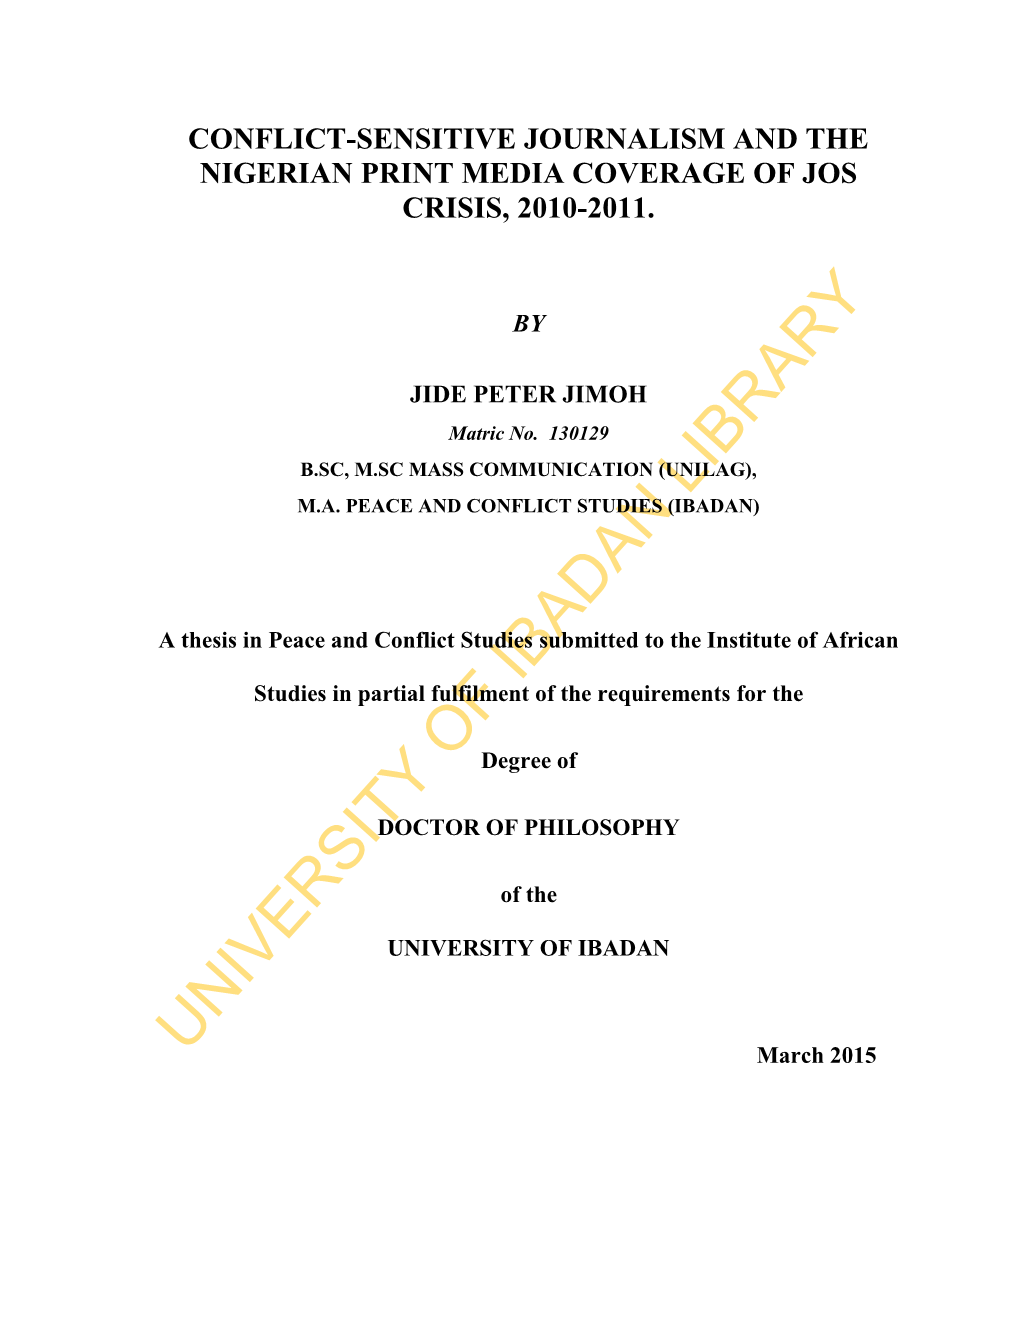 Conflict-Sensitive Journalism and the Nigerian Print Media Coverage of Jos Crisis, 2010-2011